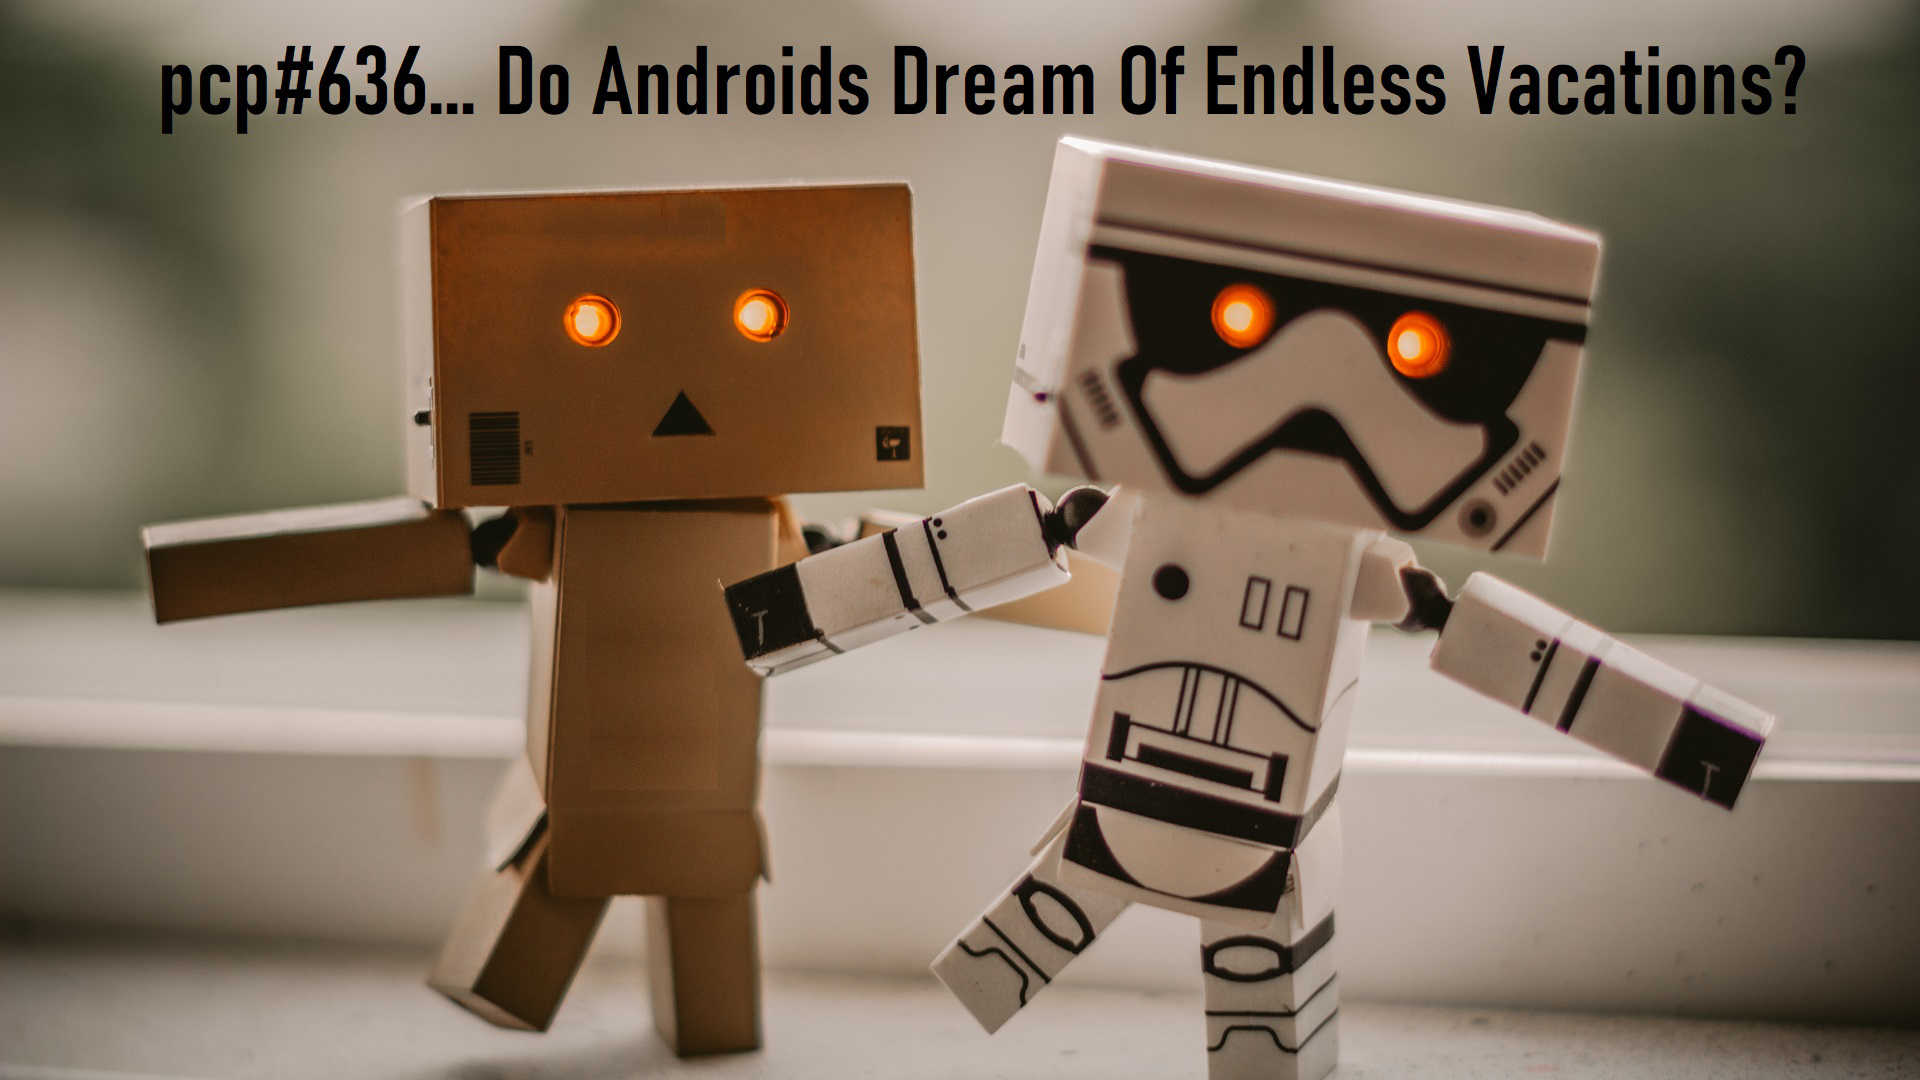 PCP#636... Do Androids Dream Of Endless Vacations?....